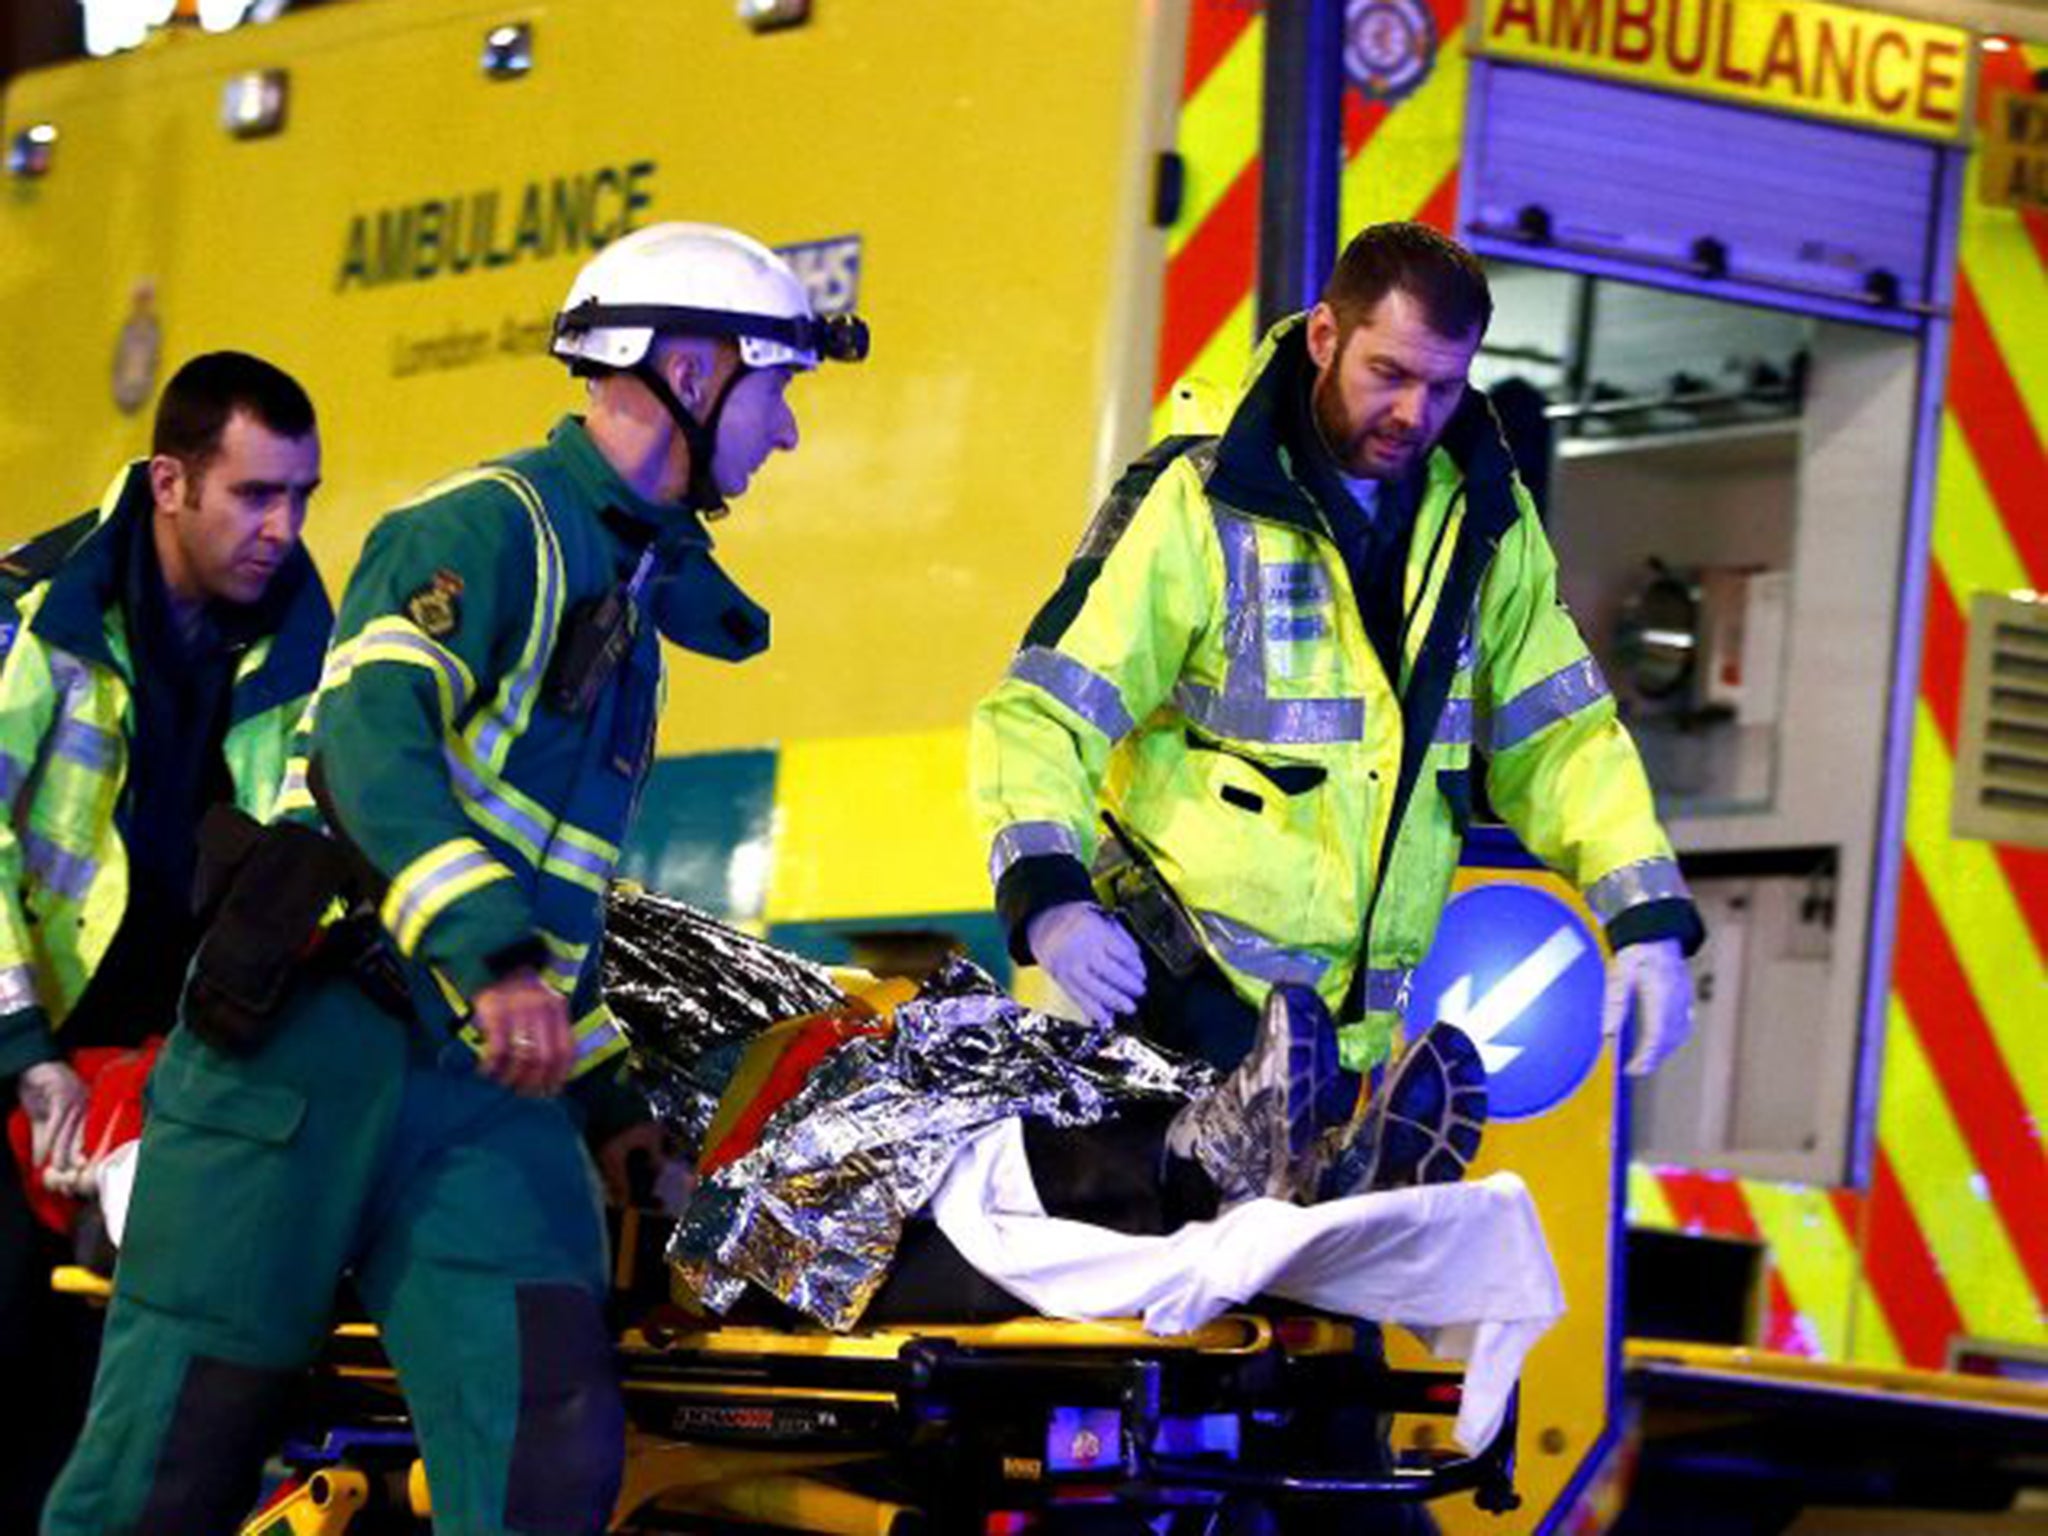 London Ambulance Service to be placed in special measures